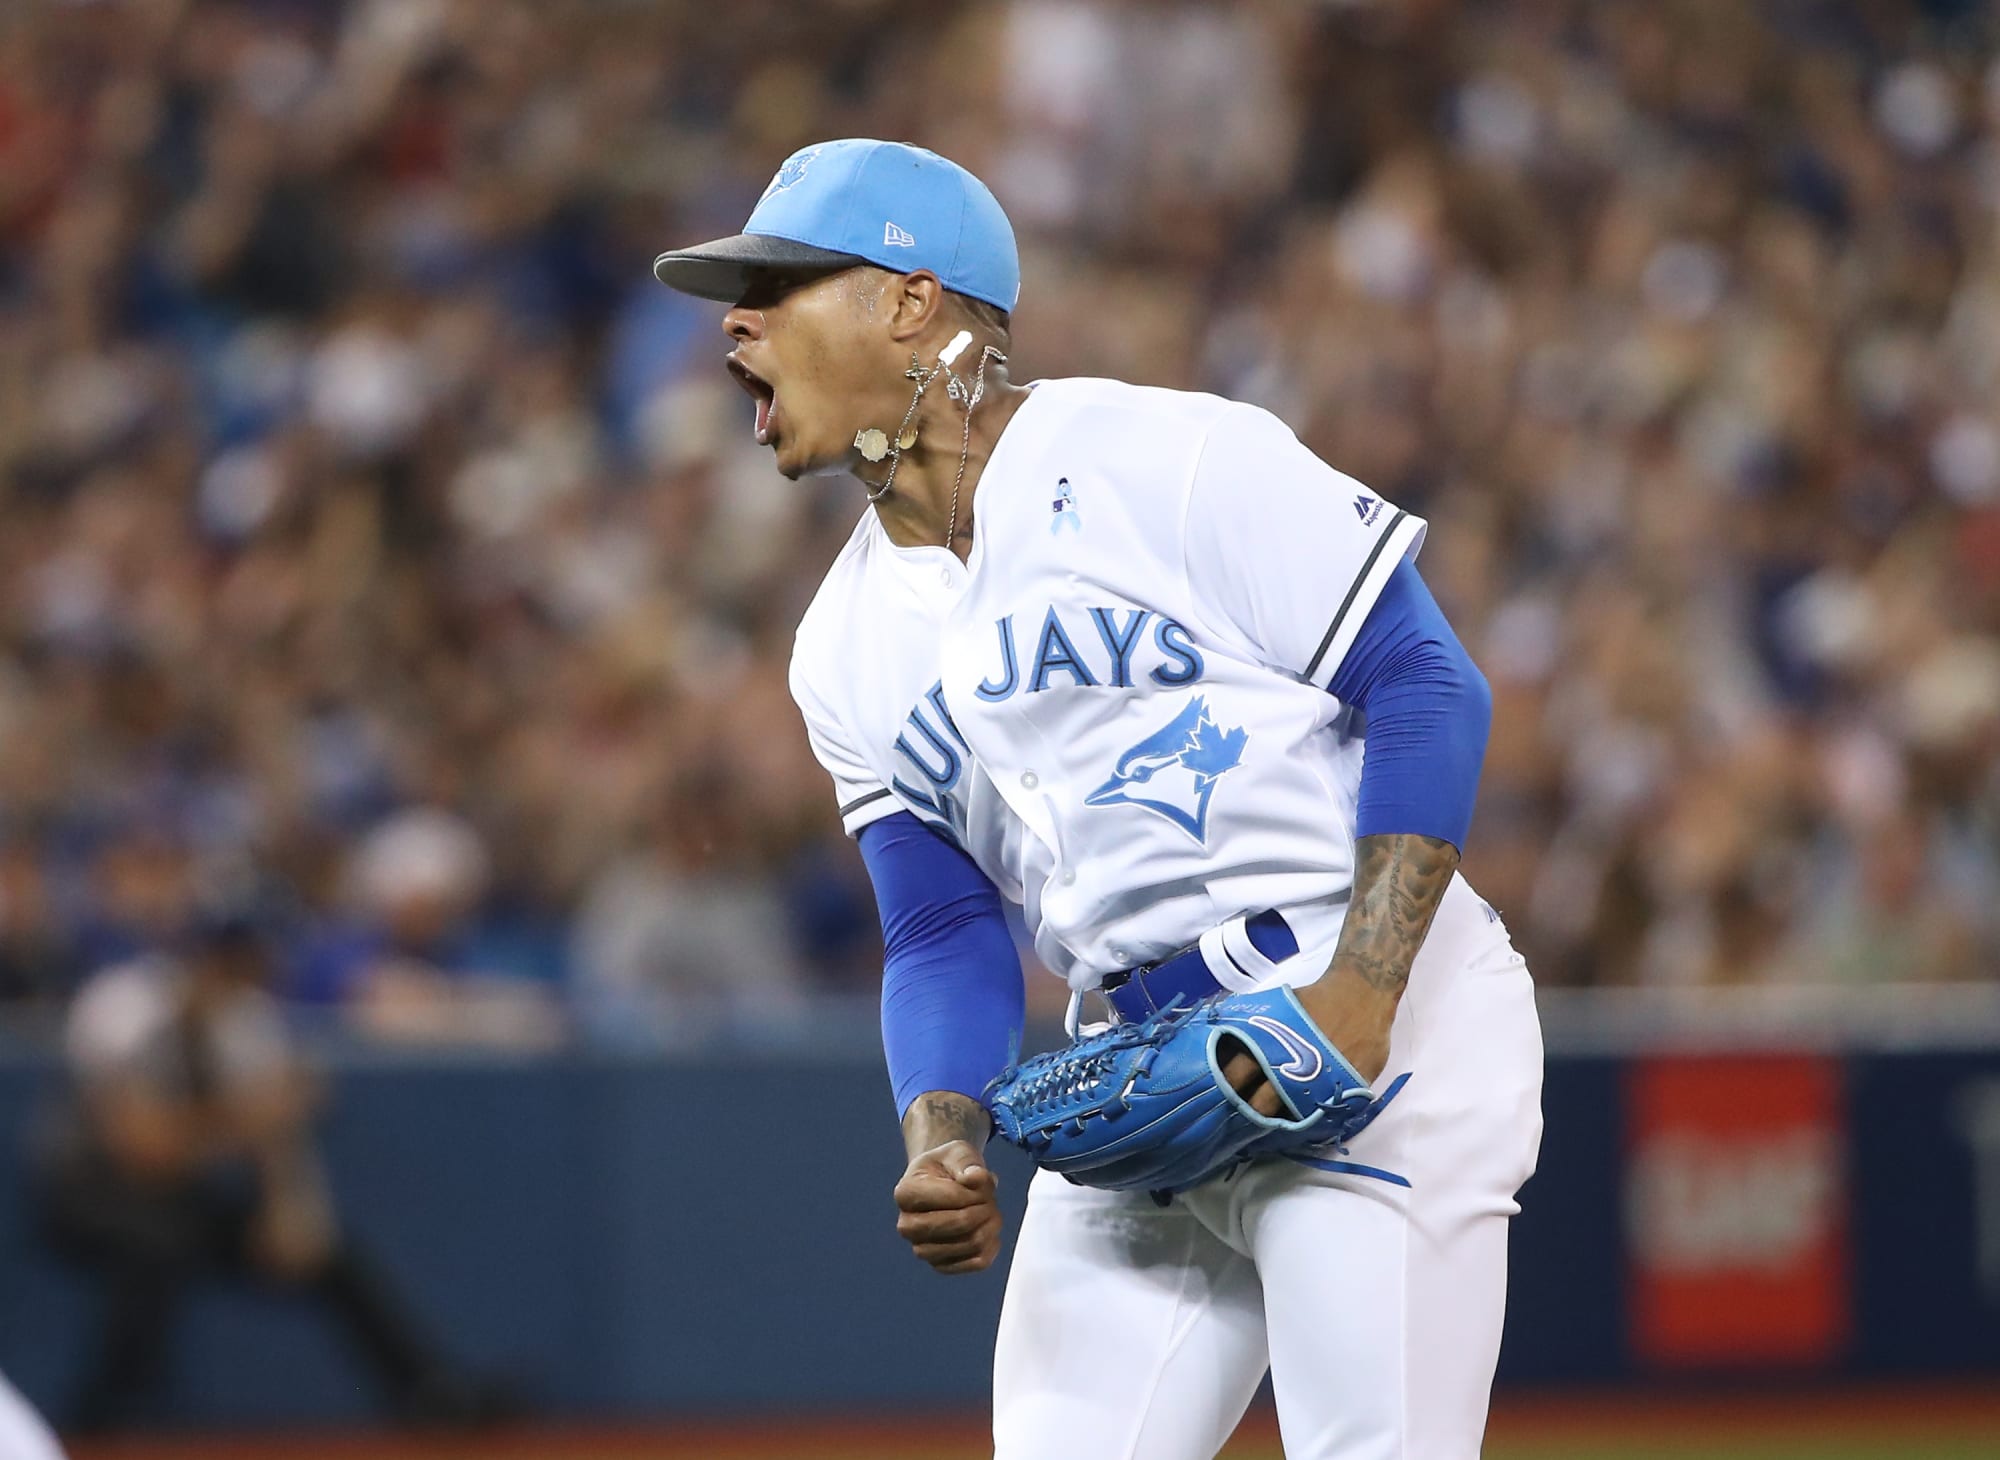 Blue Jays pitcher Marcus Stroman charges umpire, restrained by